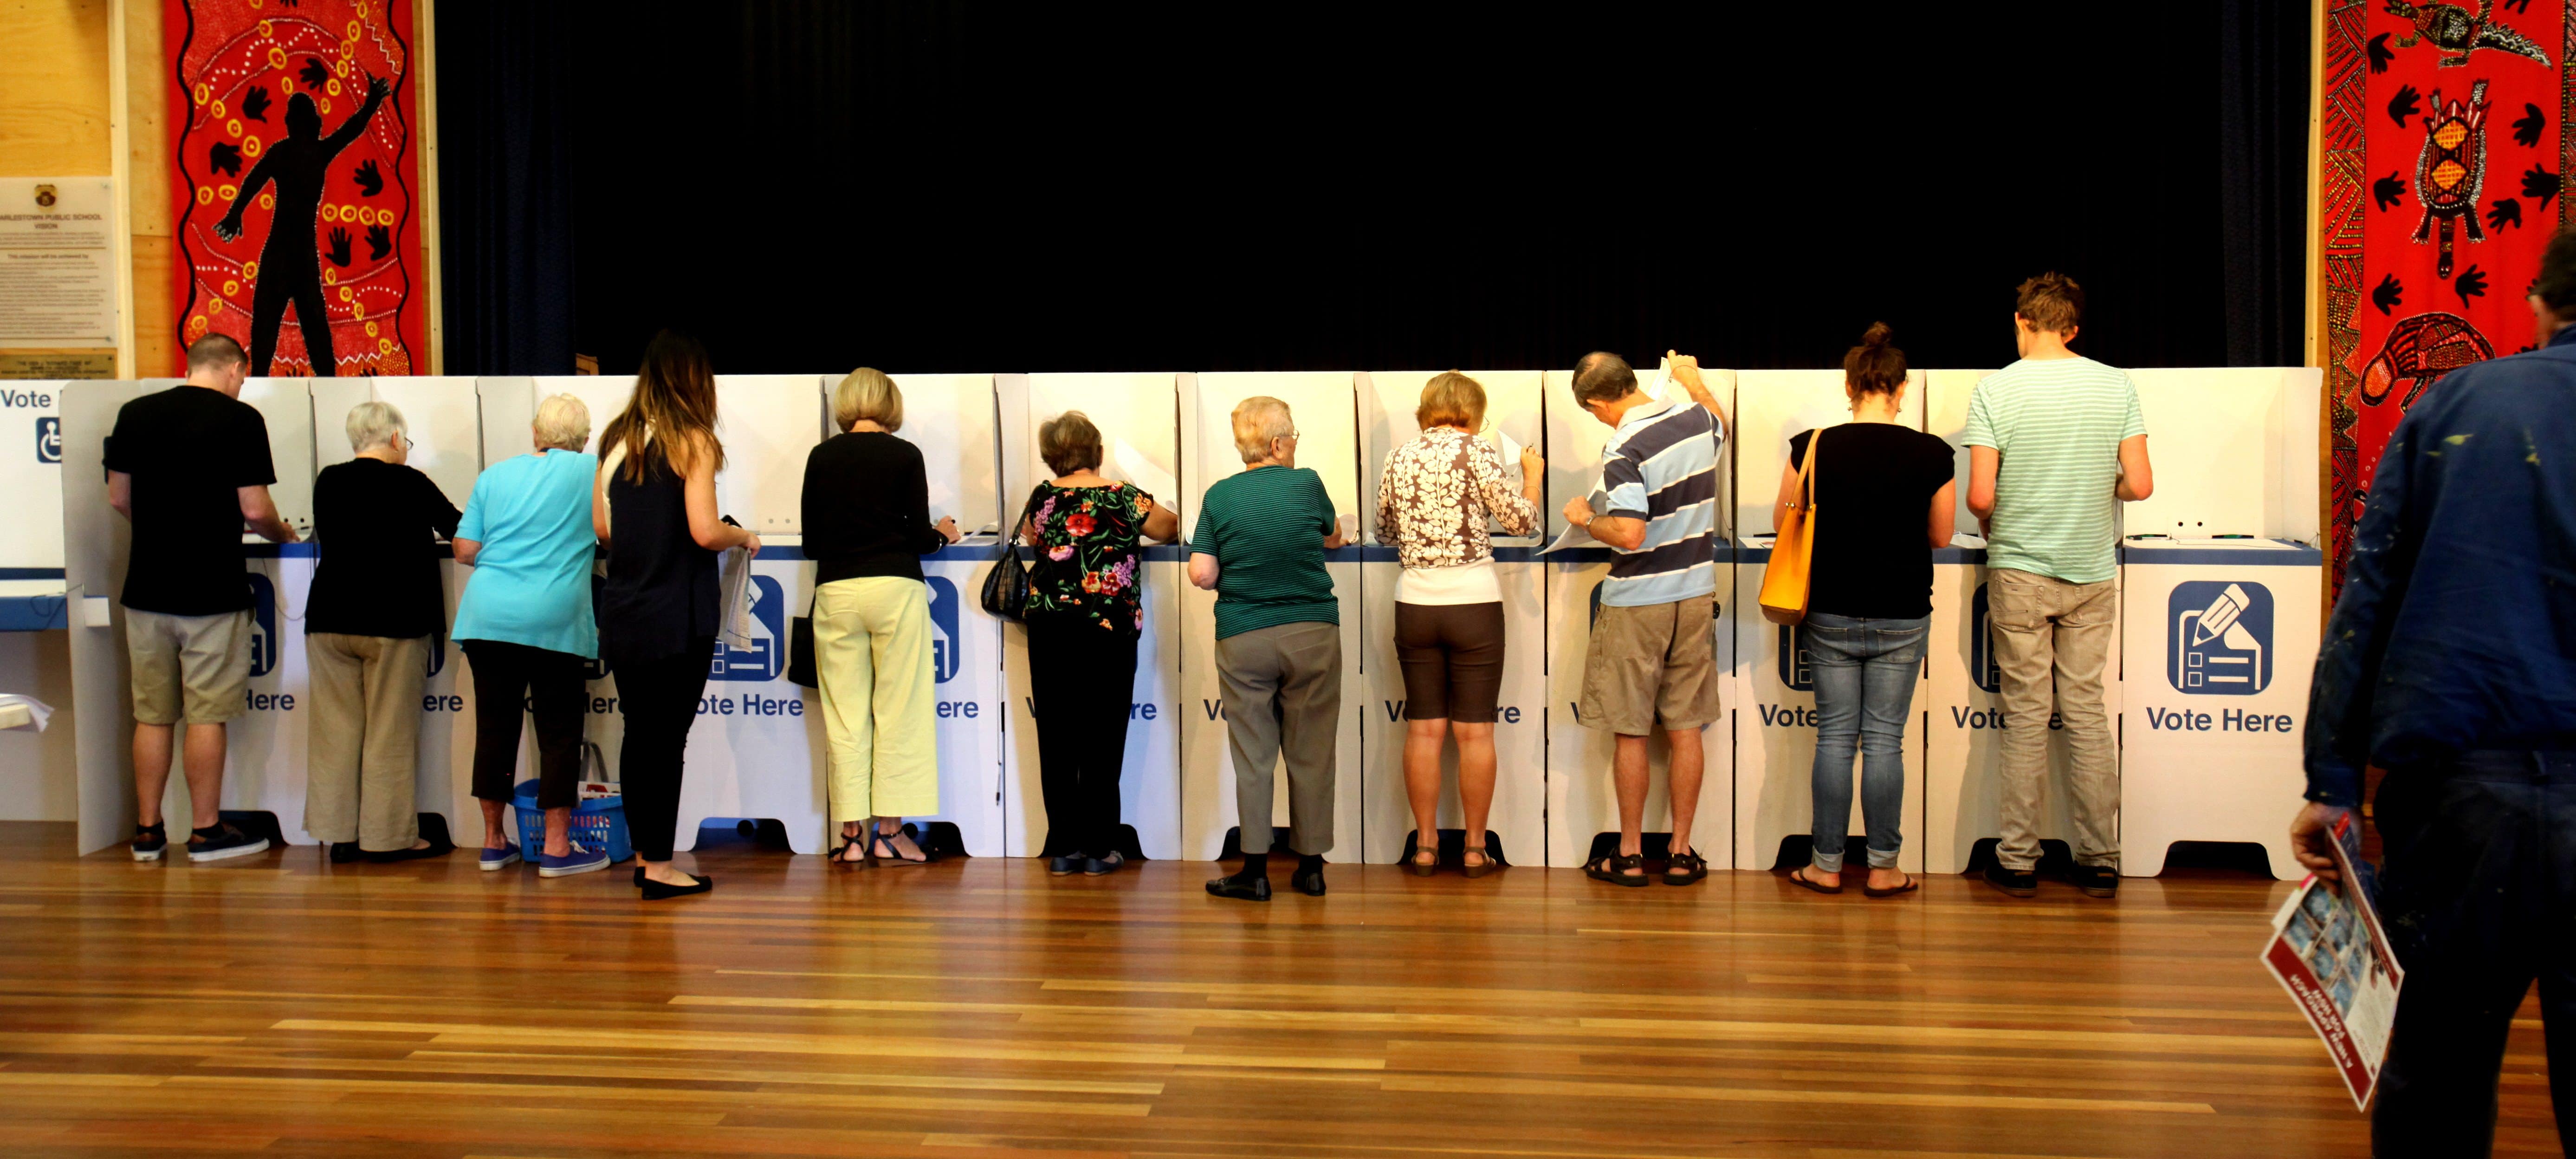 Voters take their turn at the polling booth in 2015. Photo: Phil Hearne/Fairfax Media